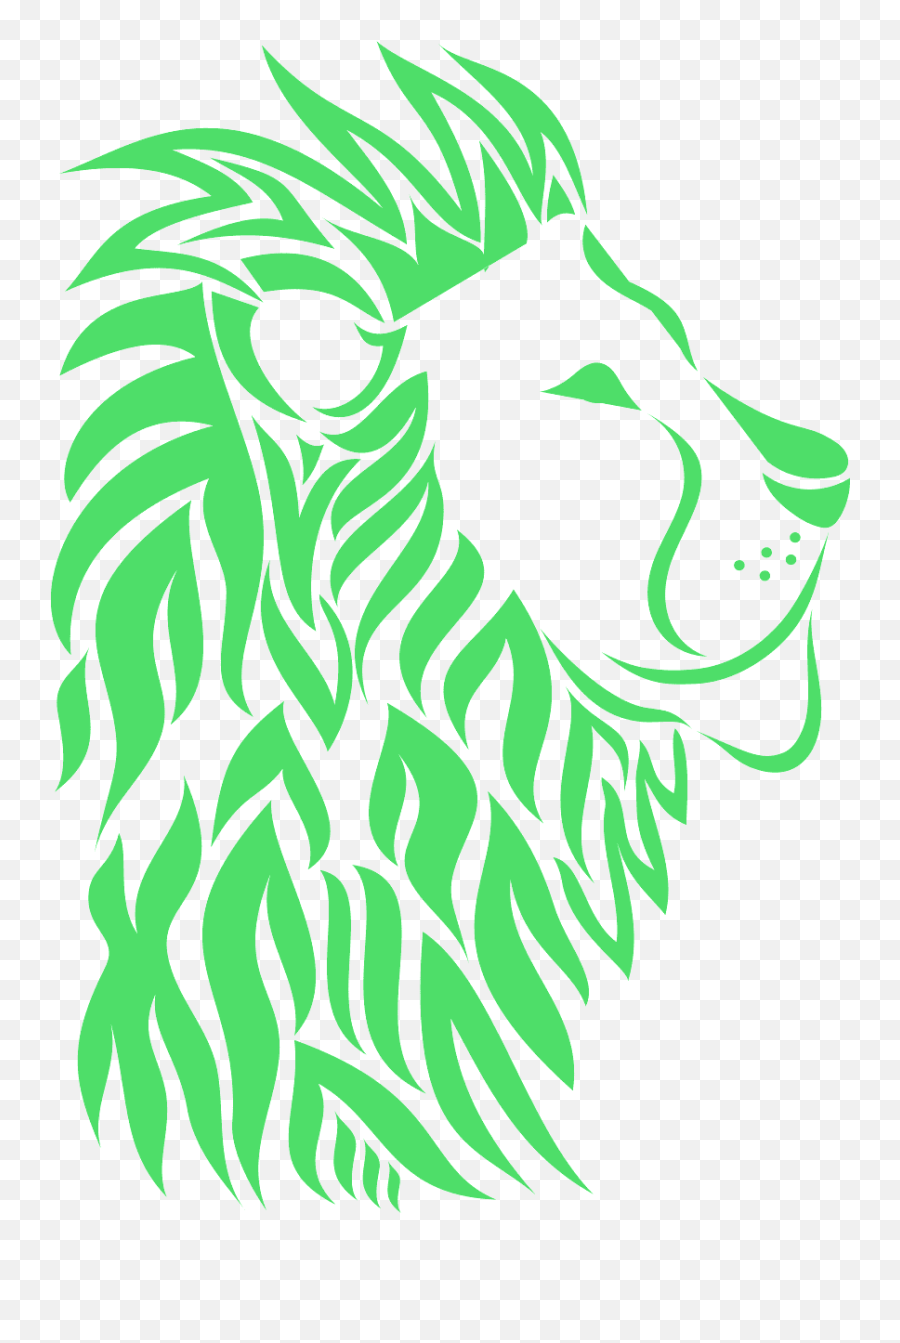 Tribal Lion Head Silhouette - Free Vector Silhouettes Free Scroll Saw Pattern Downloads Png,Lion Head Transparent